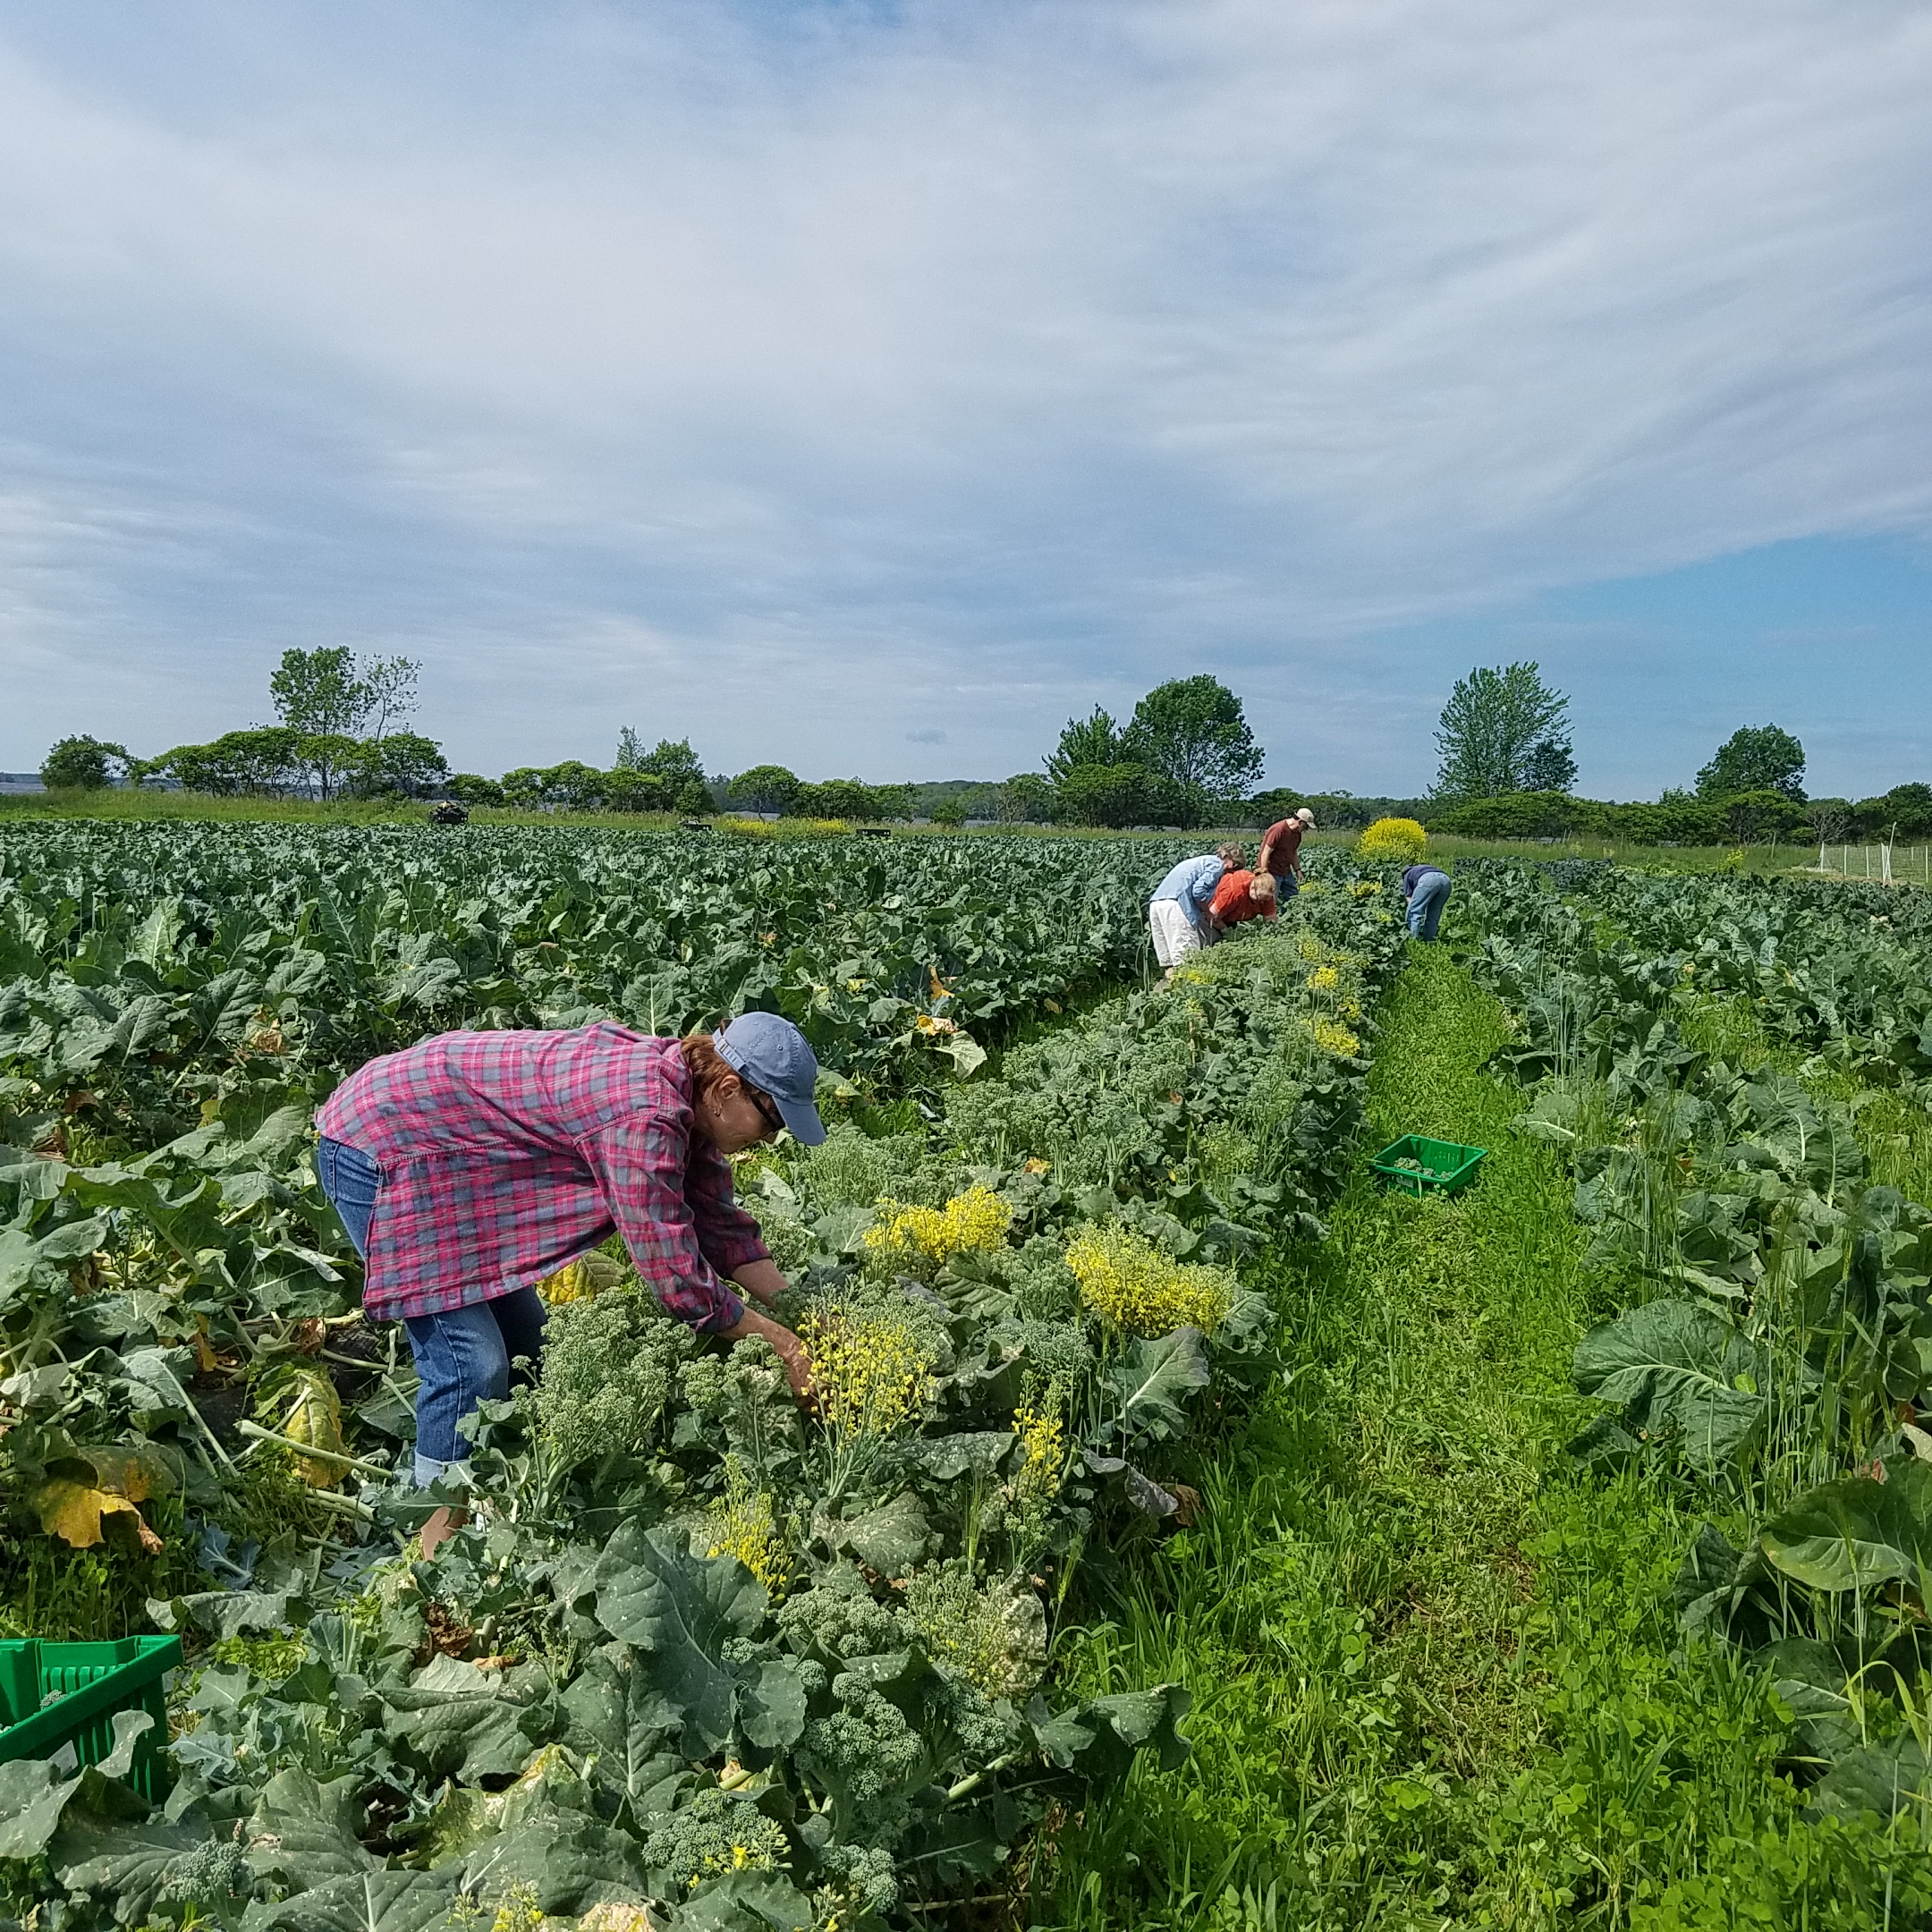   “It's wonderful to see excess produce from our farm being harvested for those in need.” -Nate Drummond, Six River Farm    